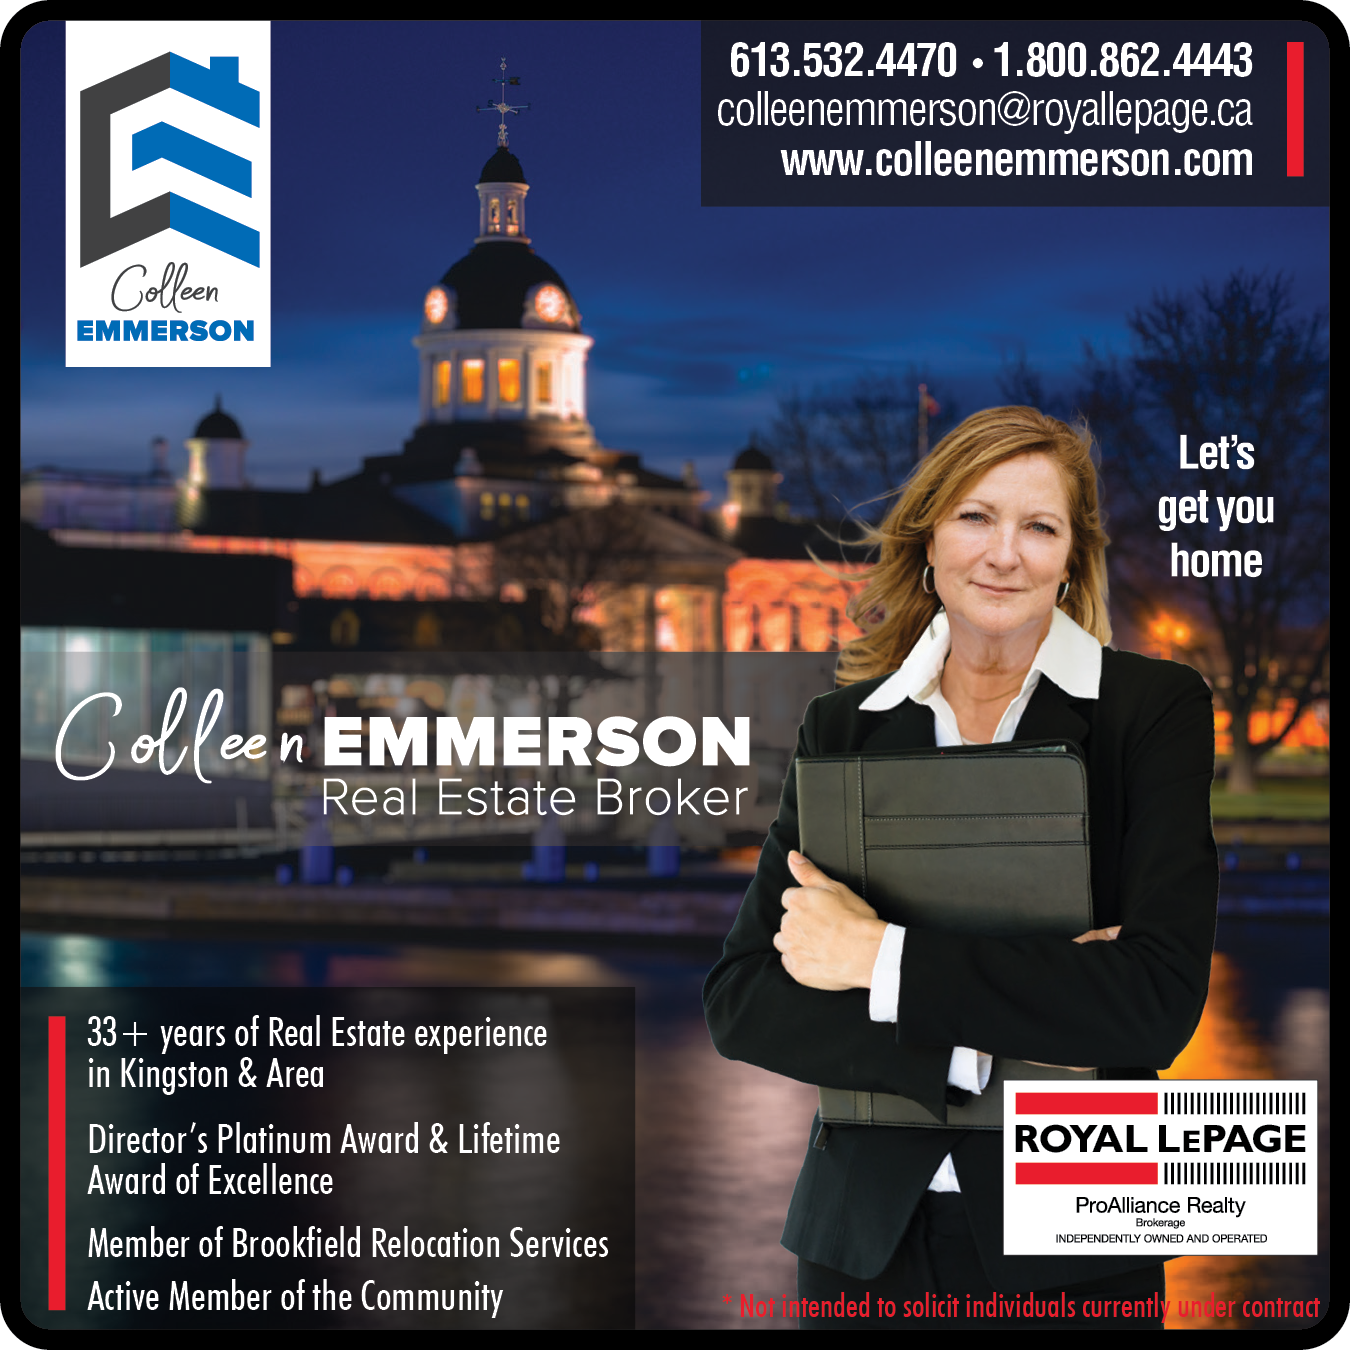 Colleen Emmerson Royal Lepage